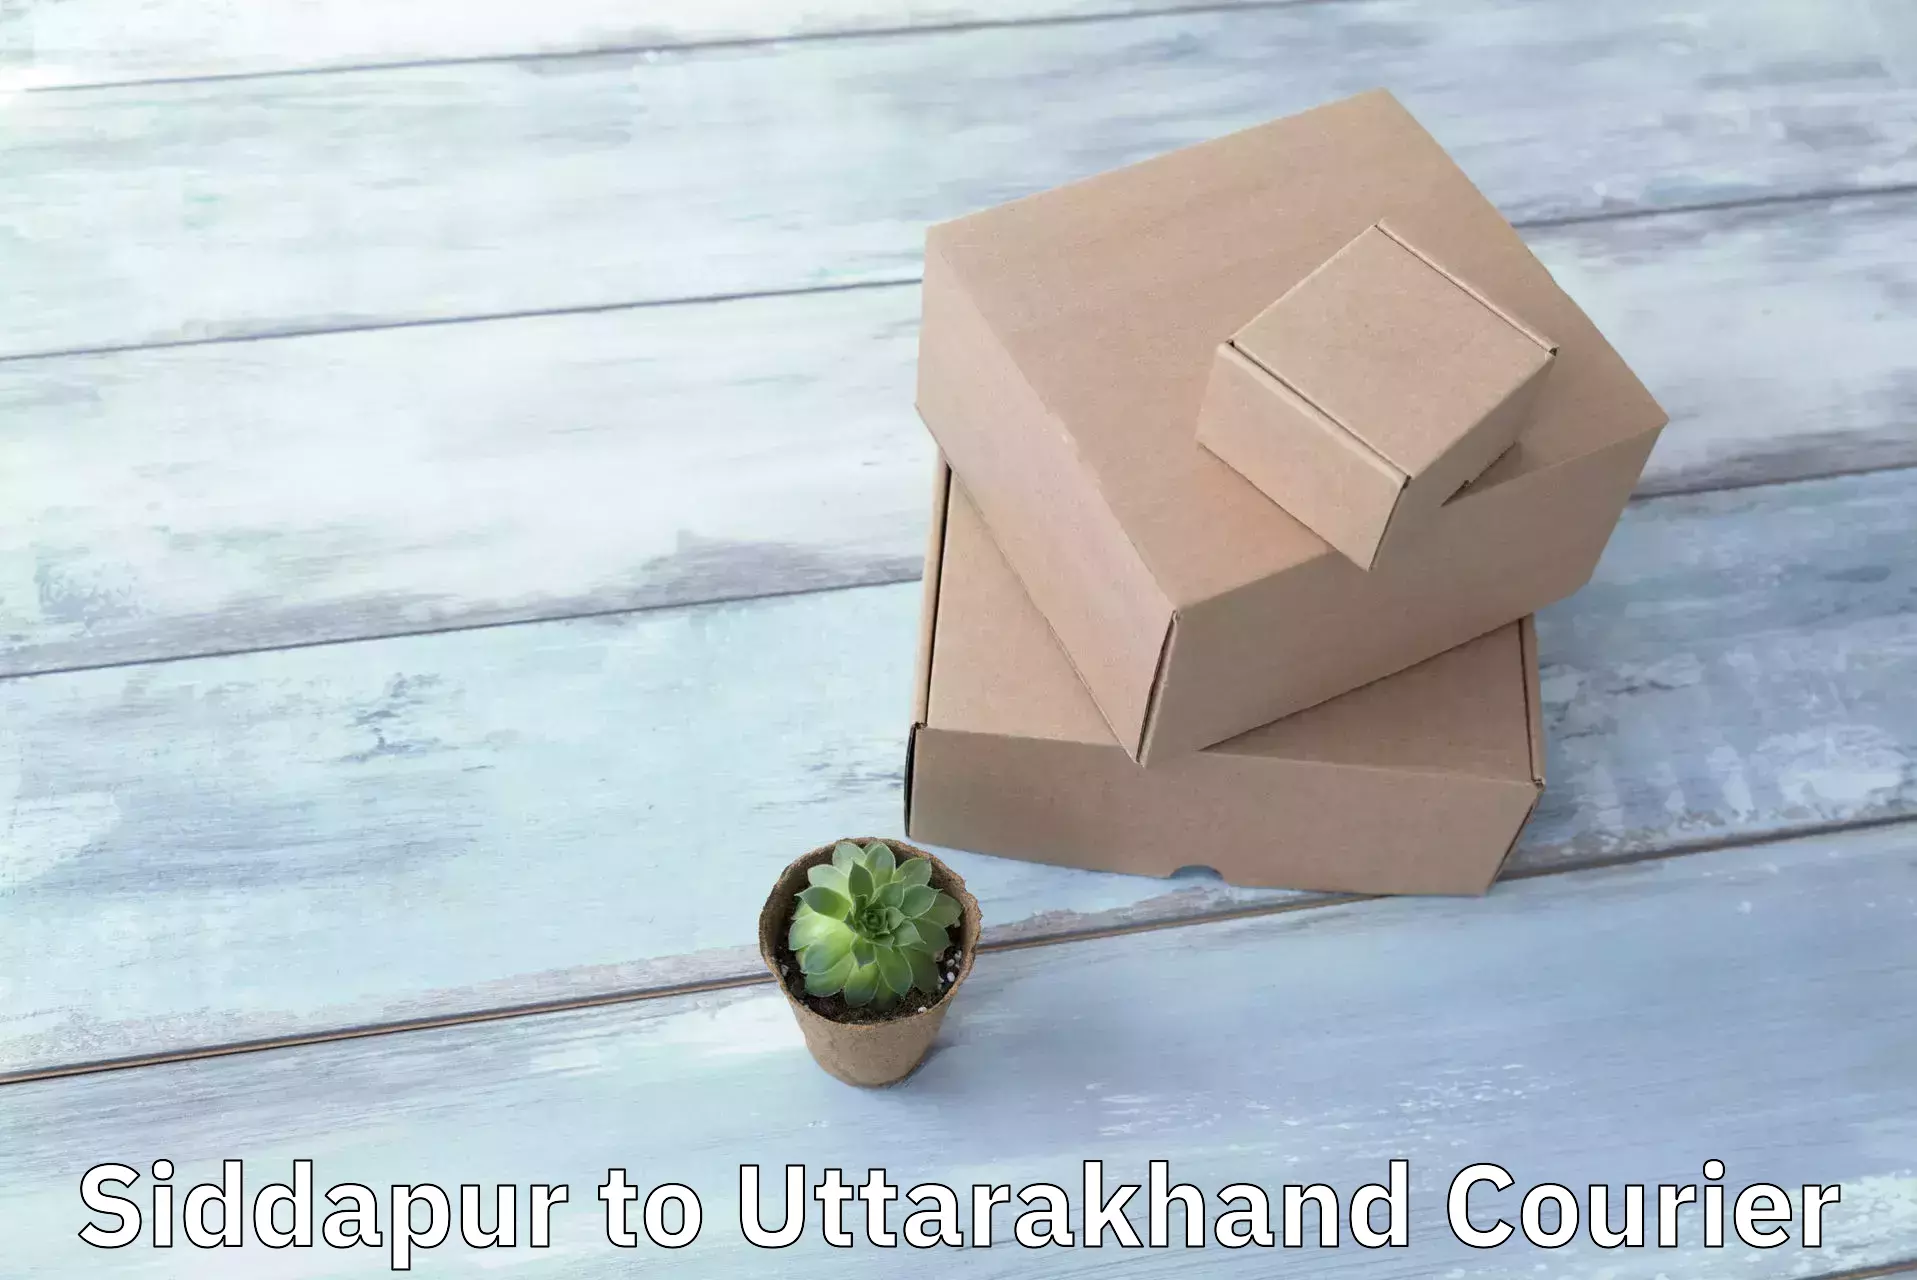 High value parcel delivery in Siddapur to Pauri Garhwal